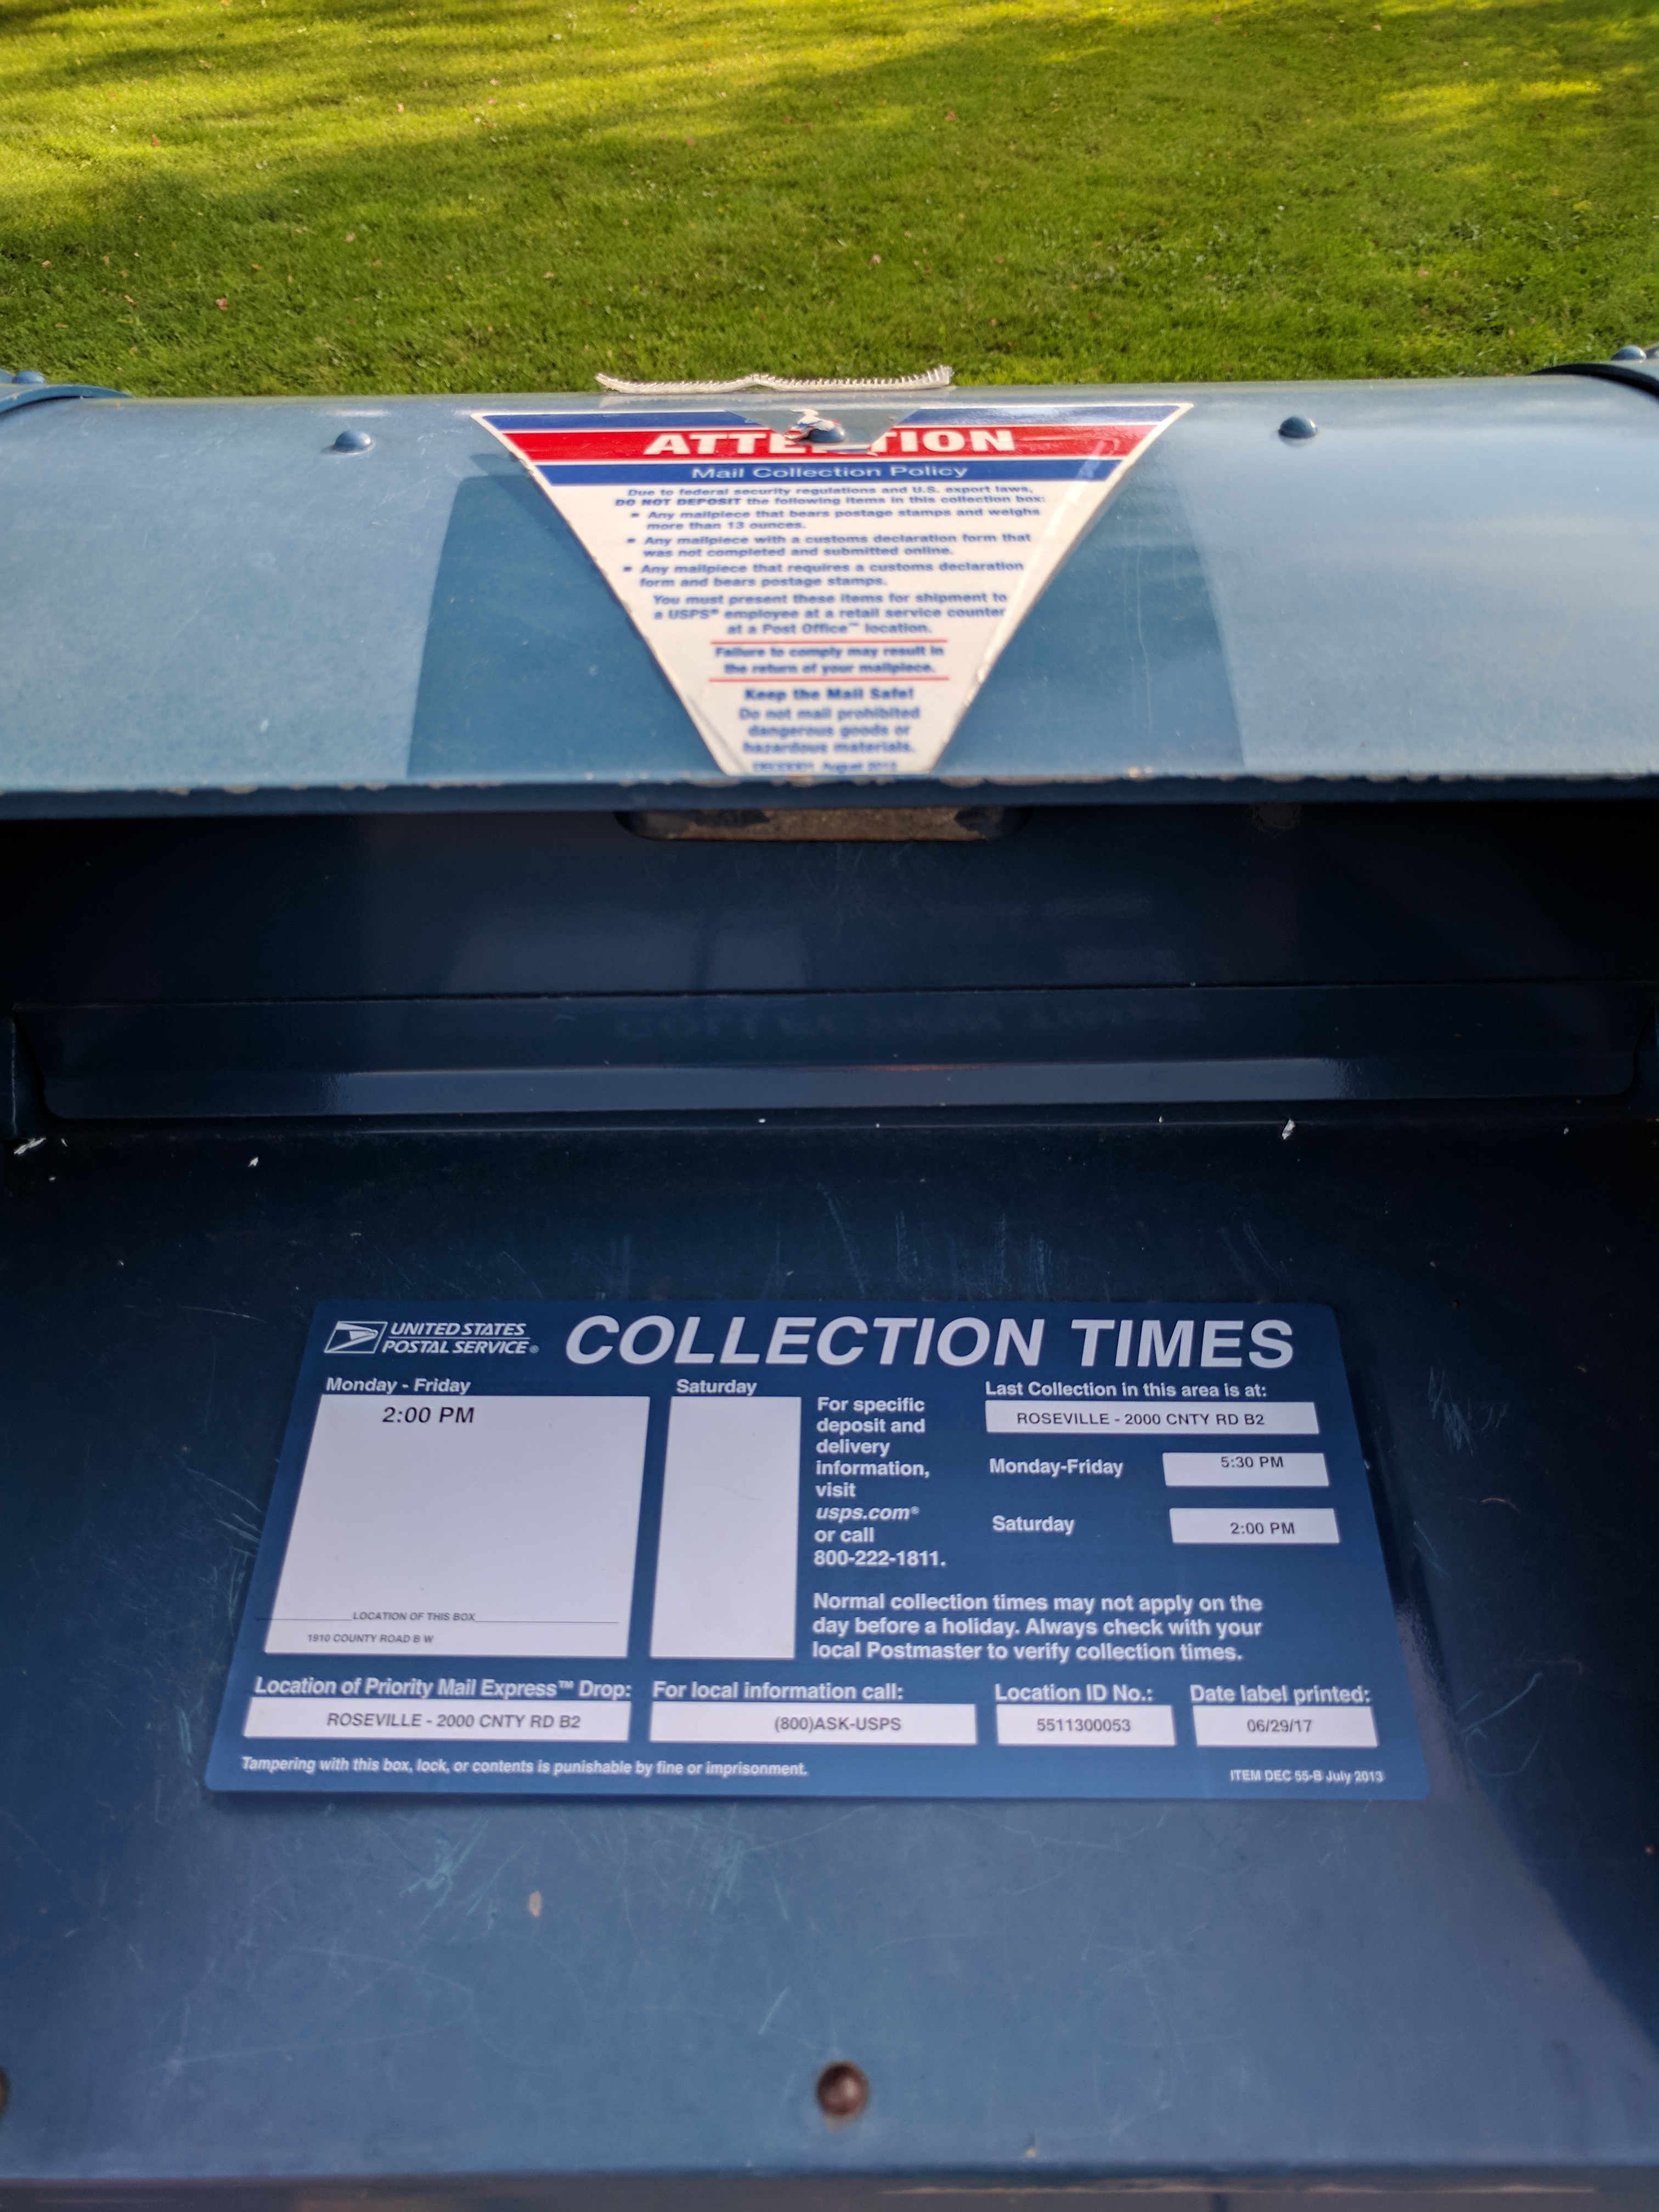 File Usps Blue Box Collection Times And Warning Stickers Jpg Wikimedia Commons